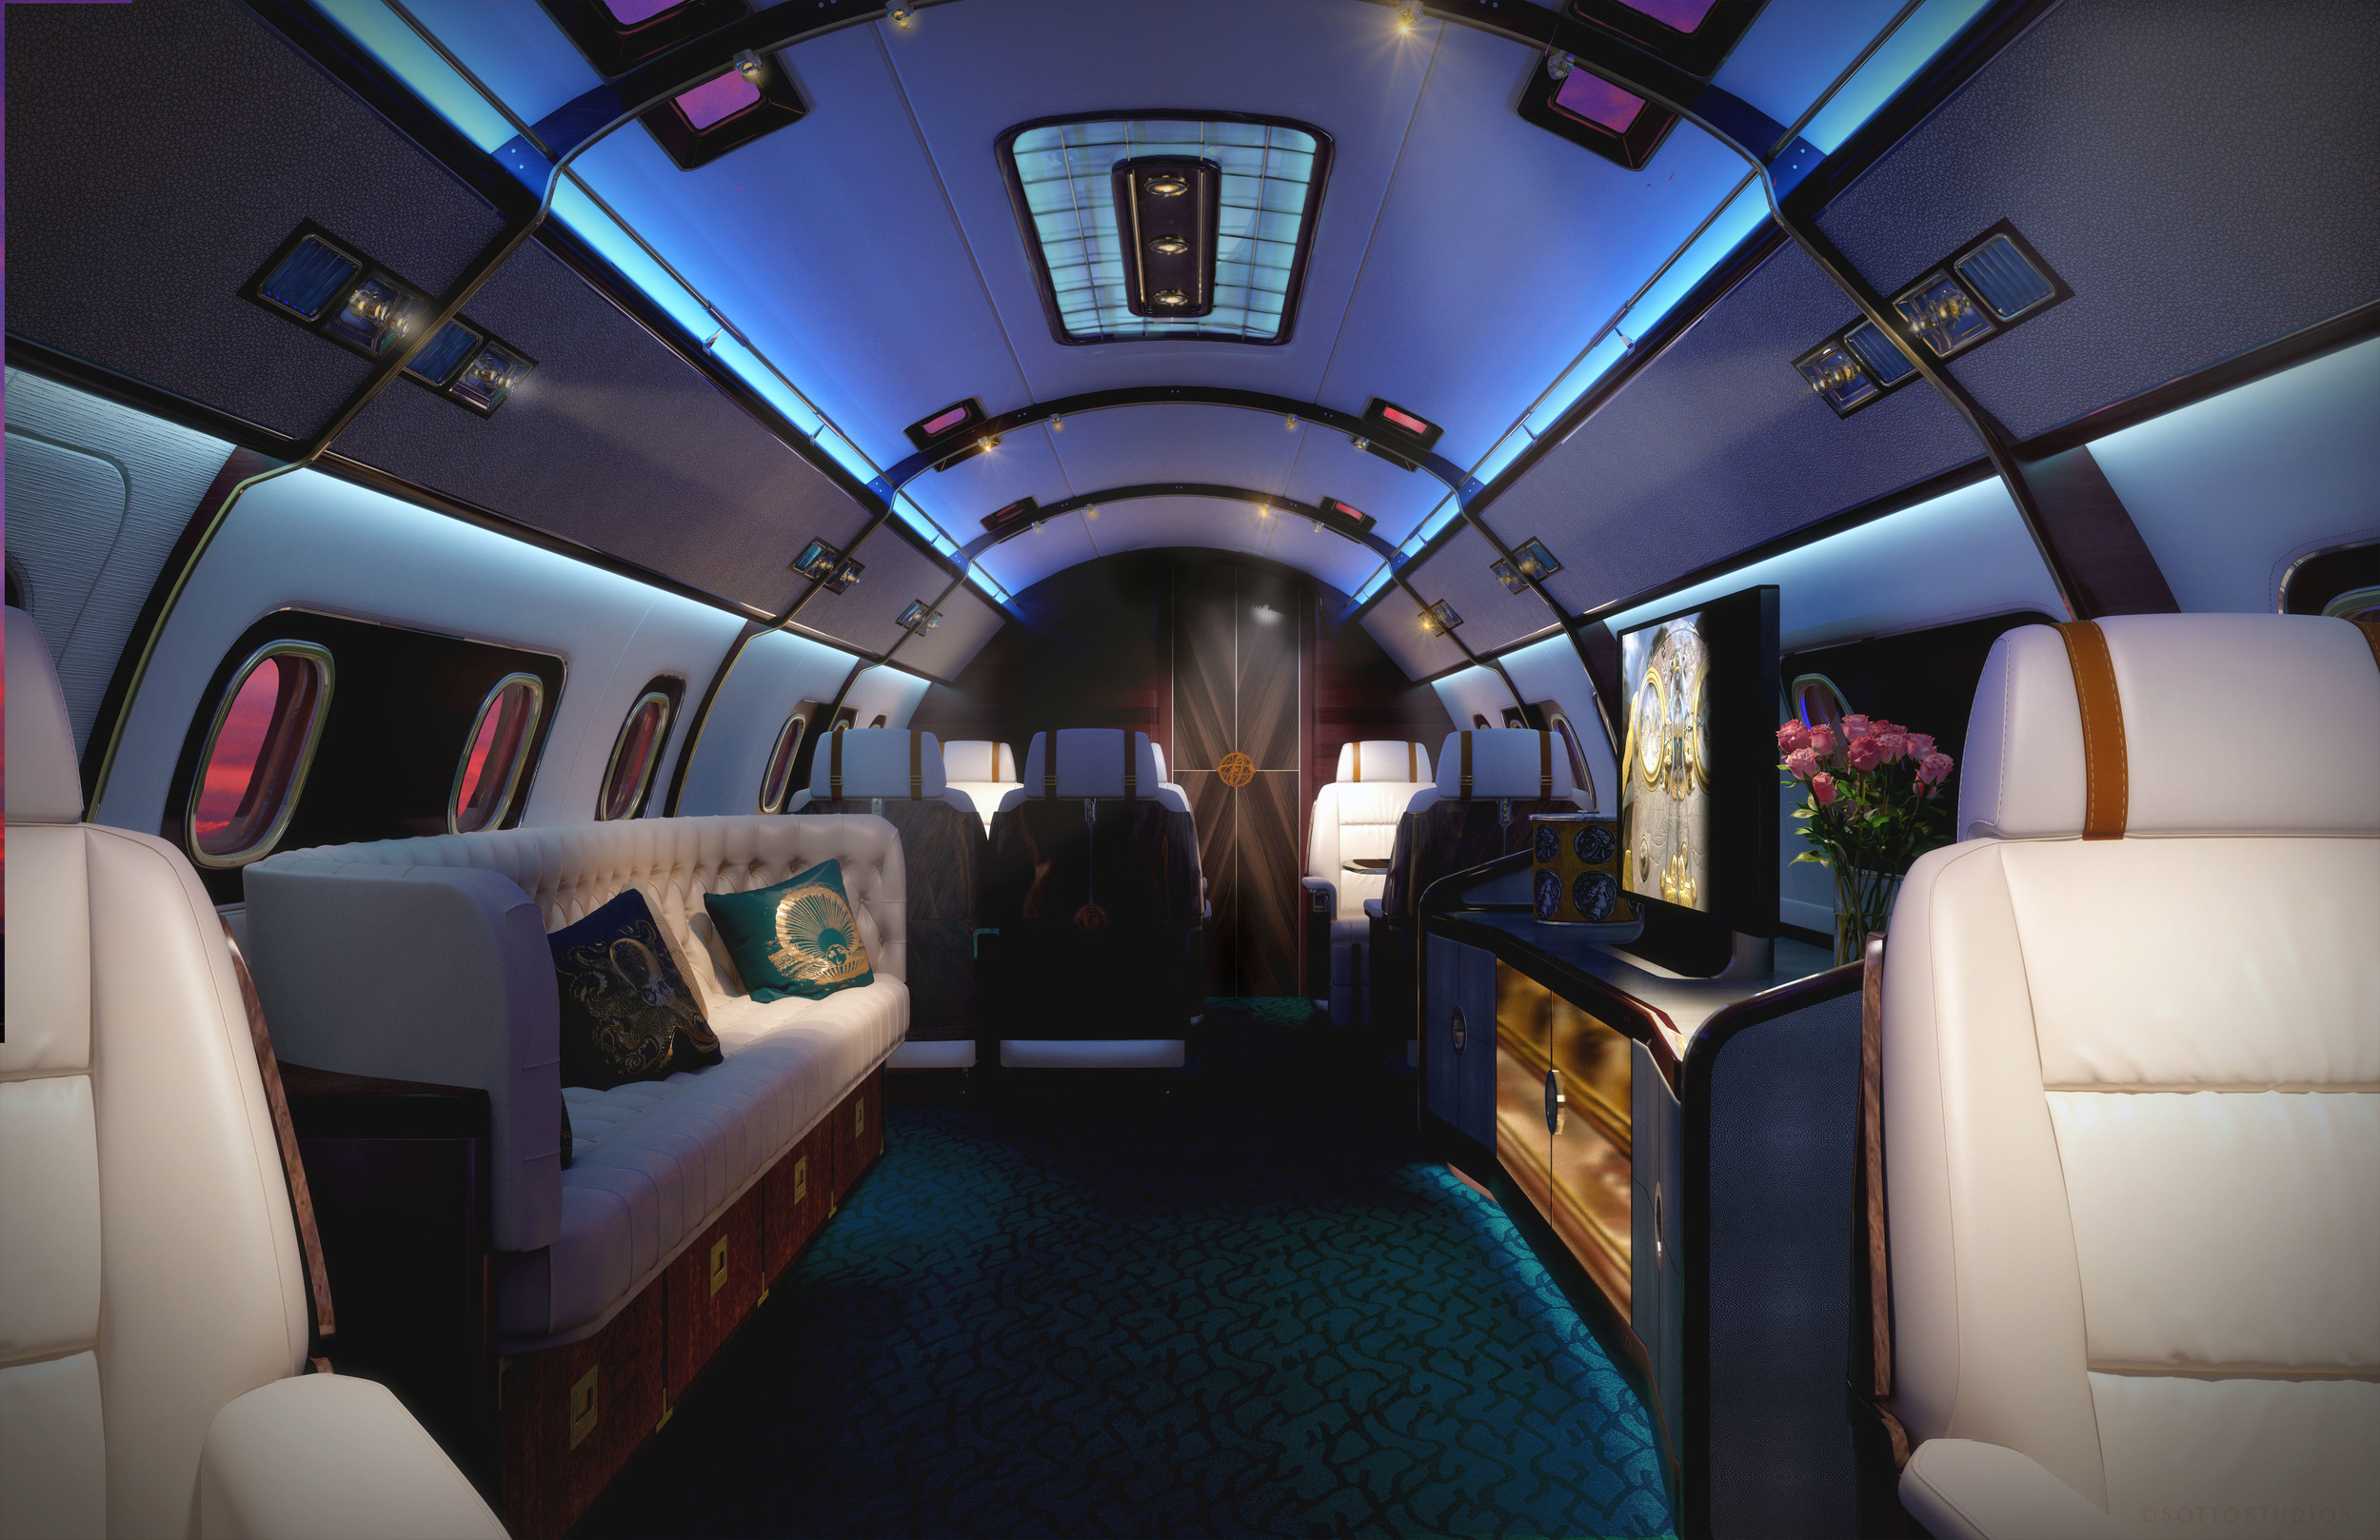 Luxury Skyacht: Incredible Private Jet With A Queen Bed